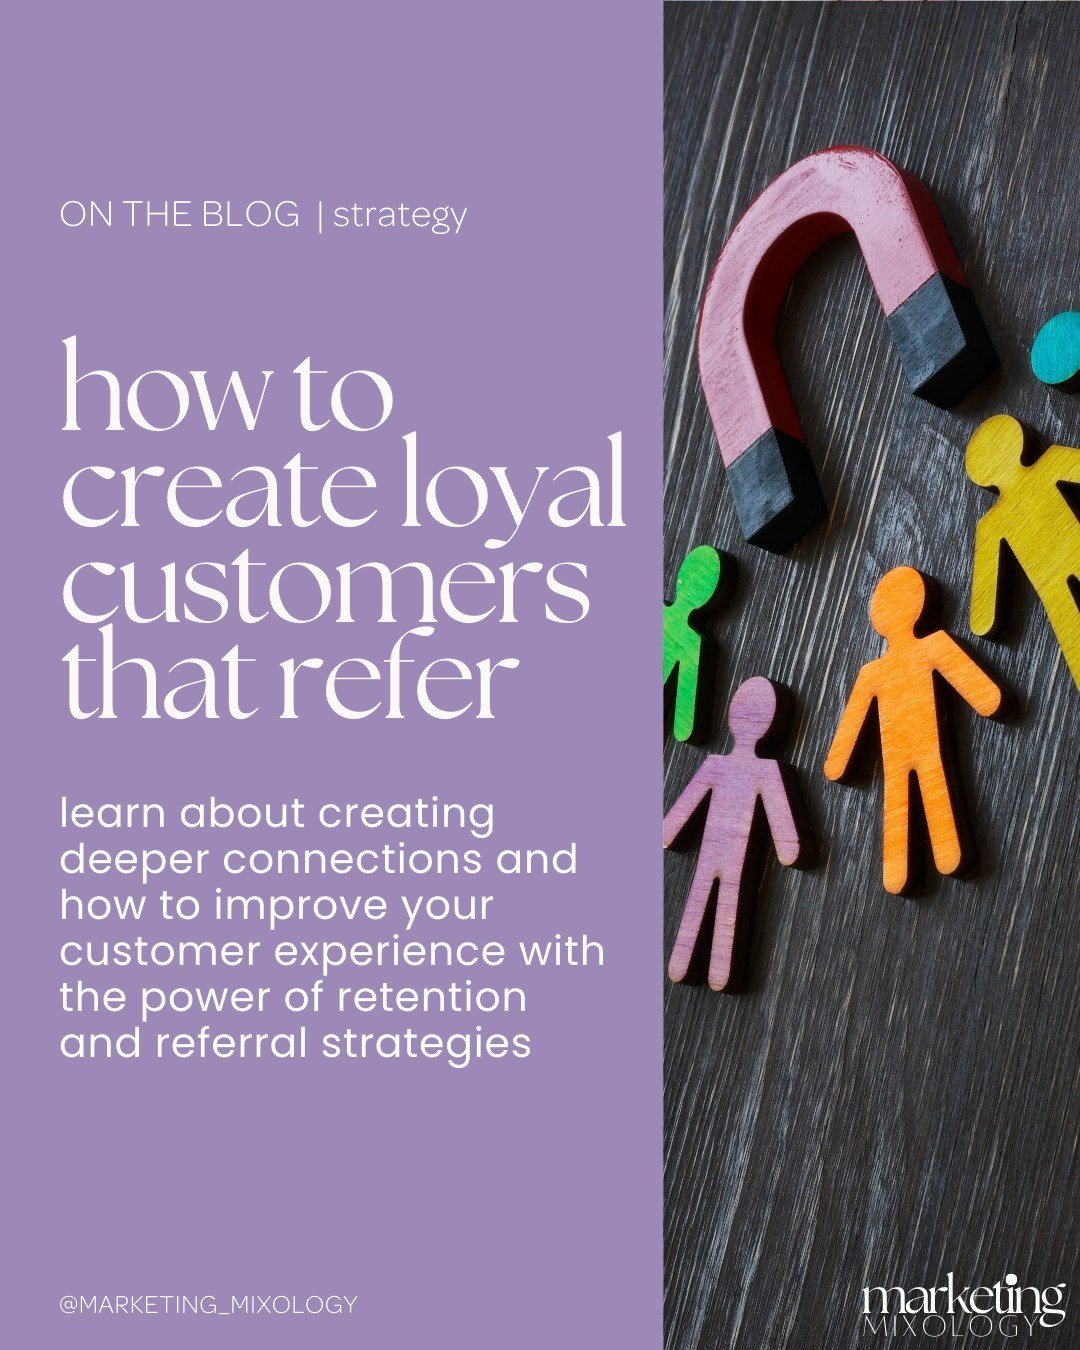 NEW ON THE BLOG 

More newness over on the blog this morning. 

This one is all about about making customers not just sales and the ways you can keep people coming back for more. 

We'll also cover retention and referral strategies, now these can som